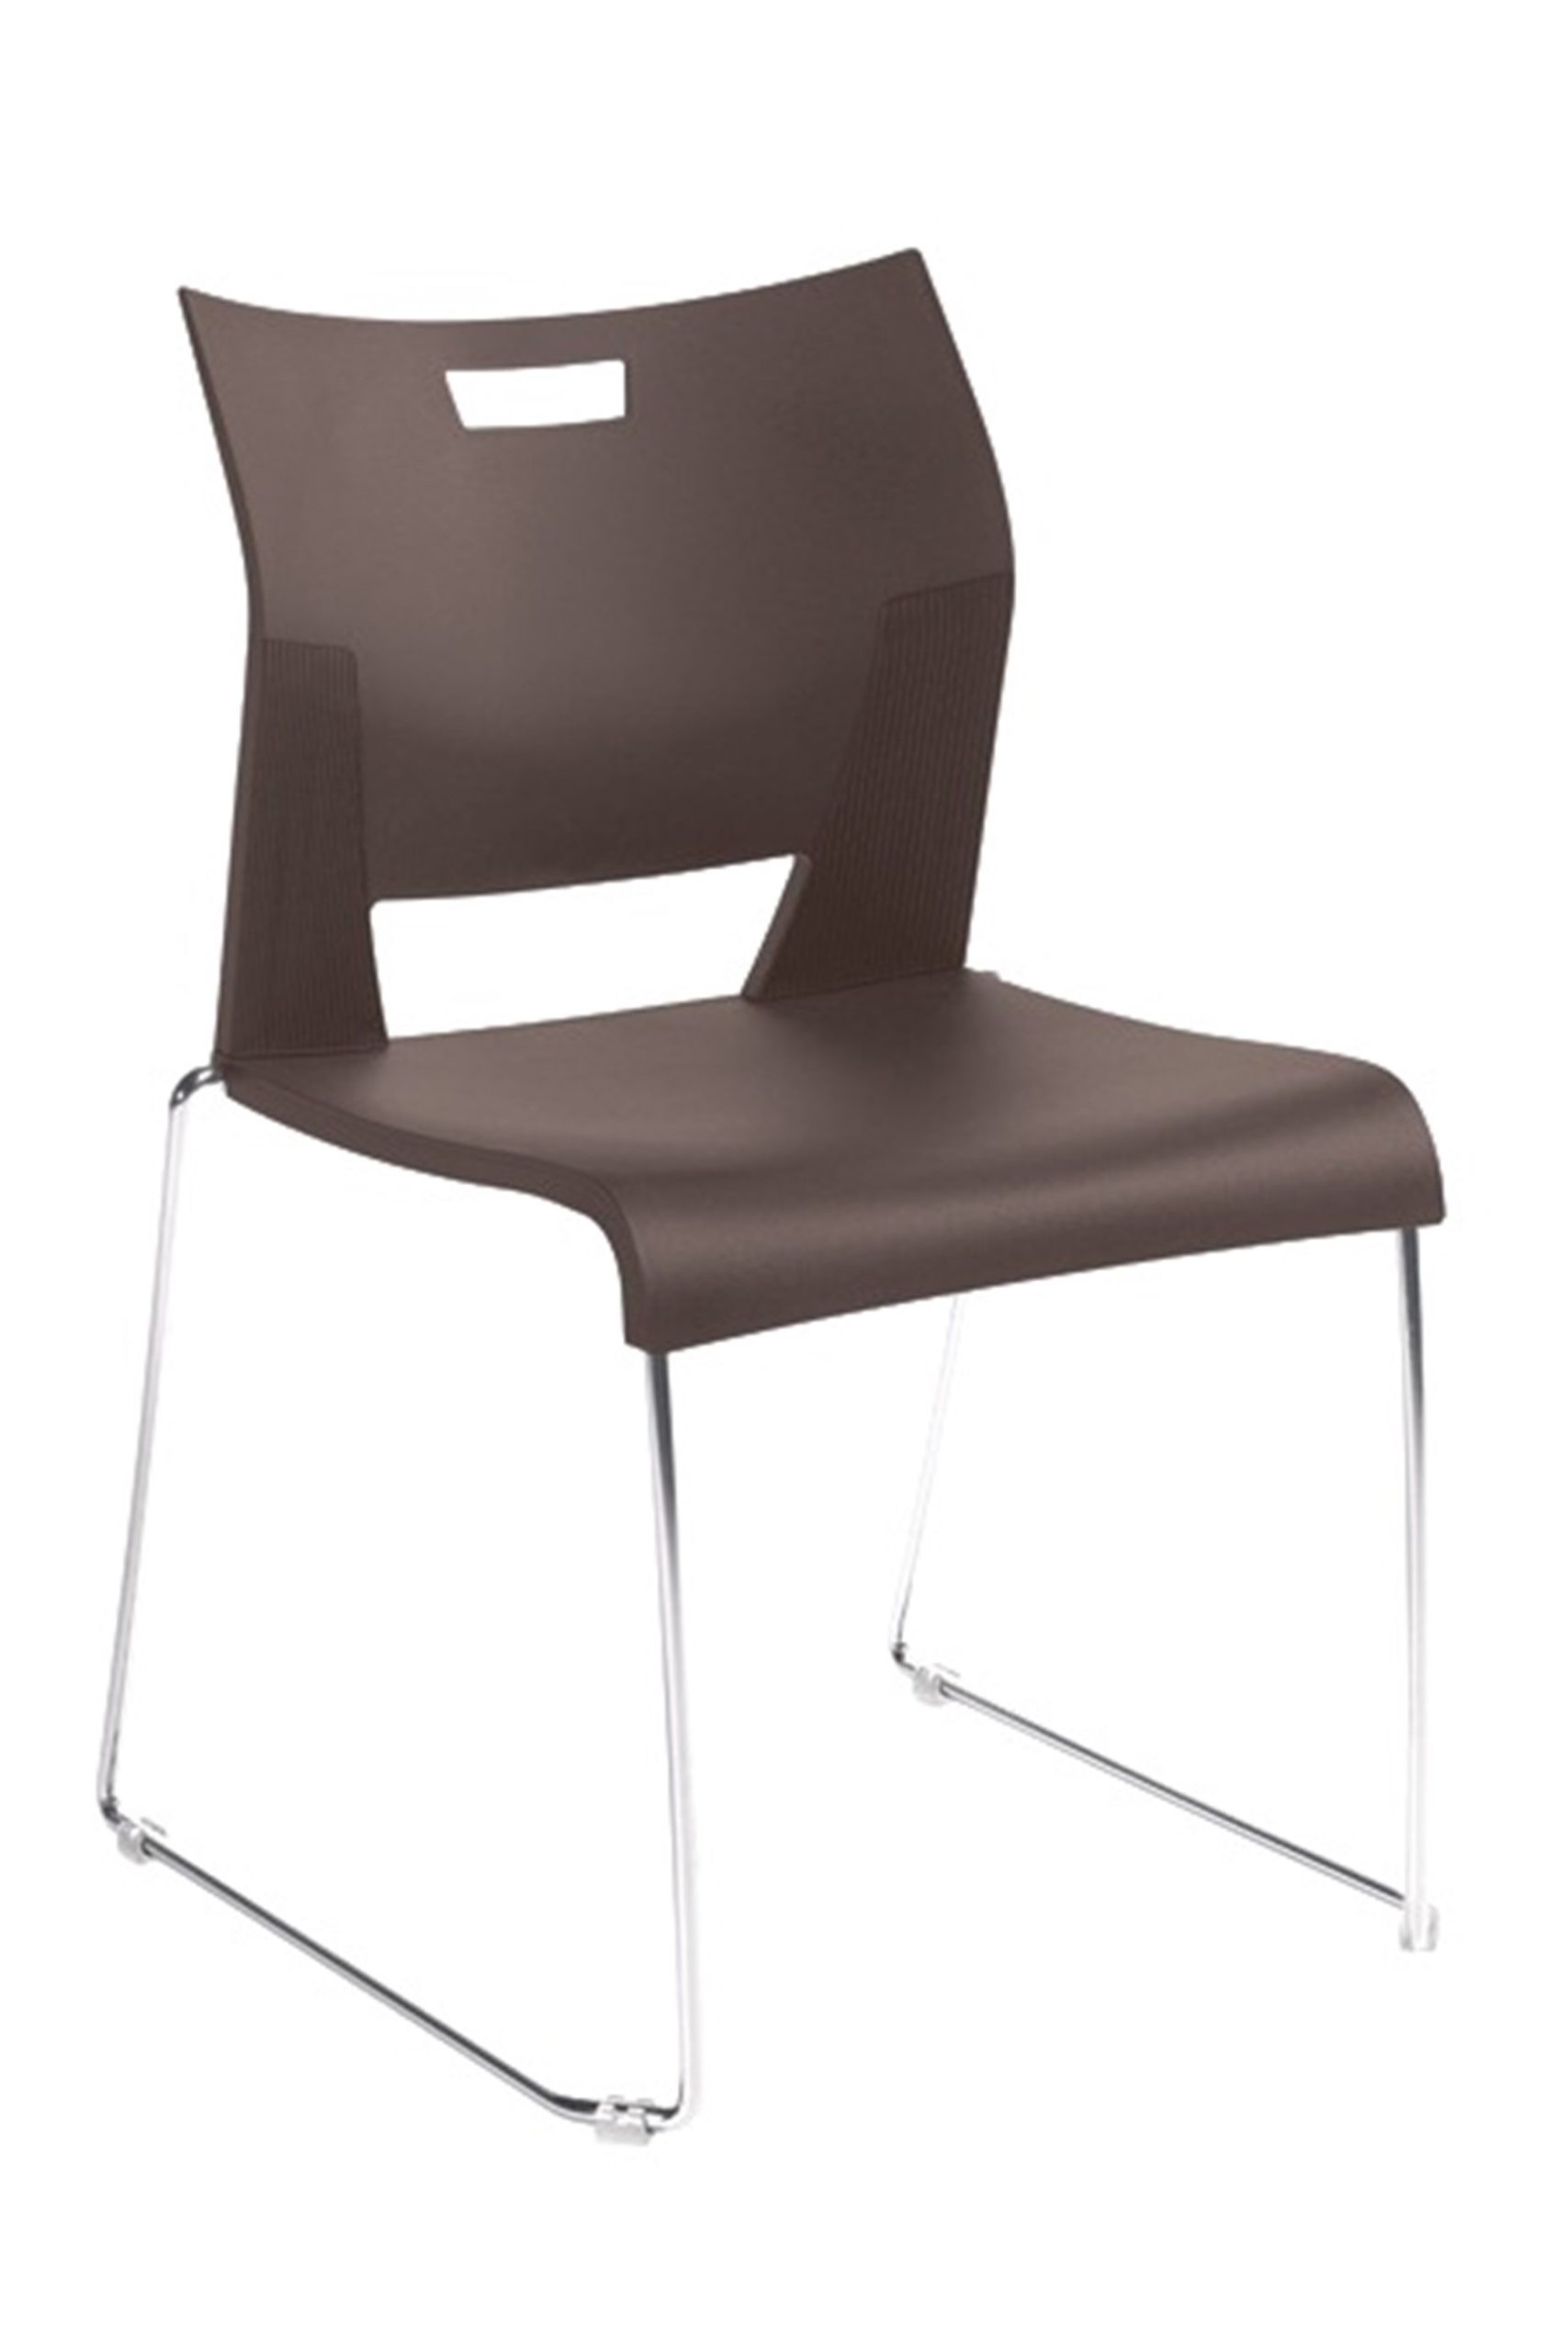 Flared, contemporary polypropylene 300 lb. rated armless high density stack chair in dark brown with solid rod chrome-plated base, optional glides for carpet or hard surfaces. Stacks up to 40 high on a dolly.